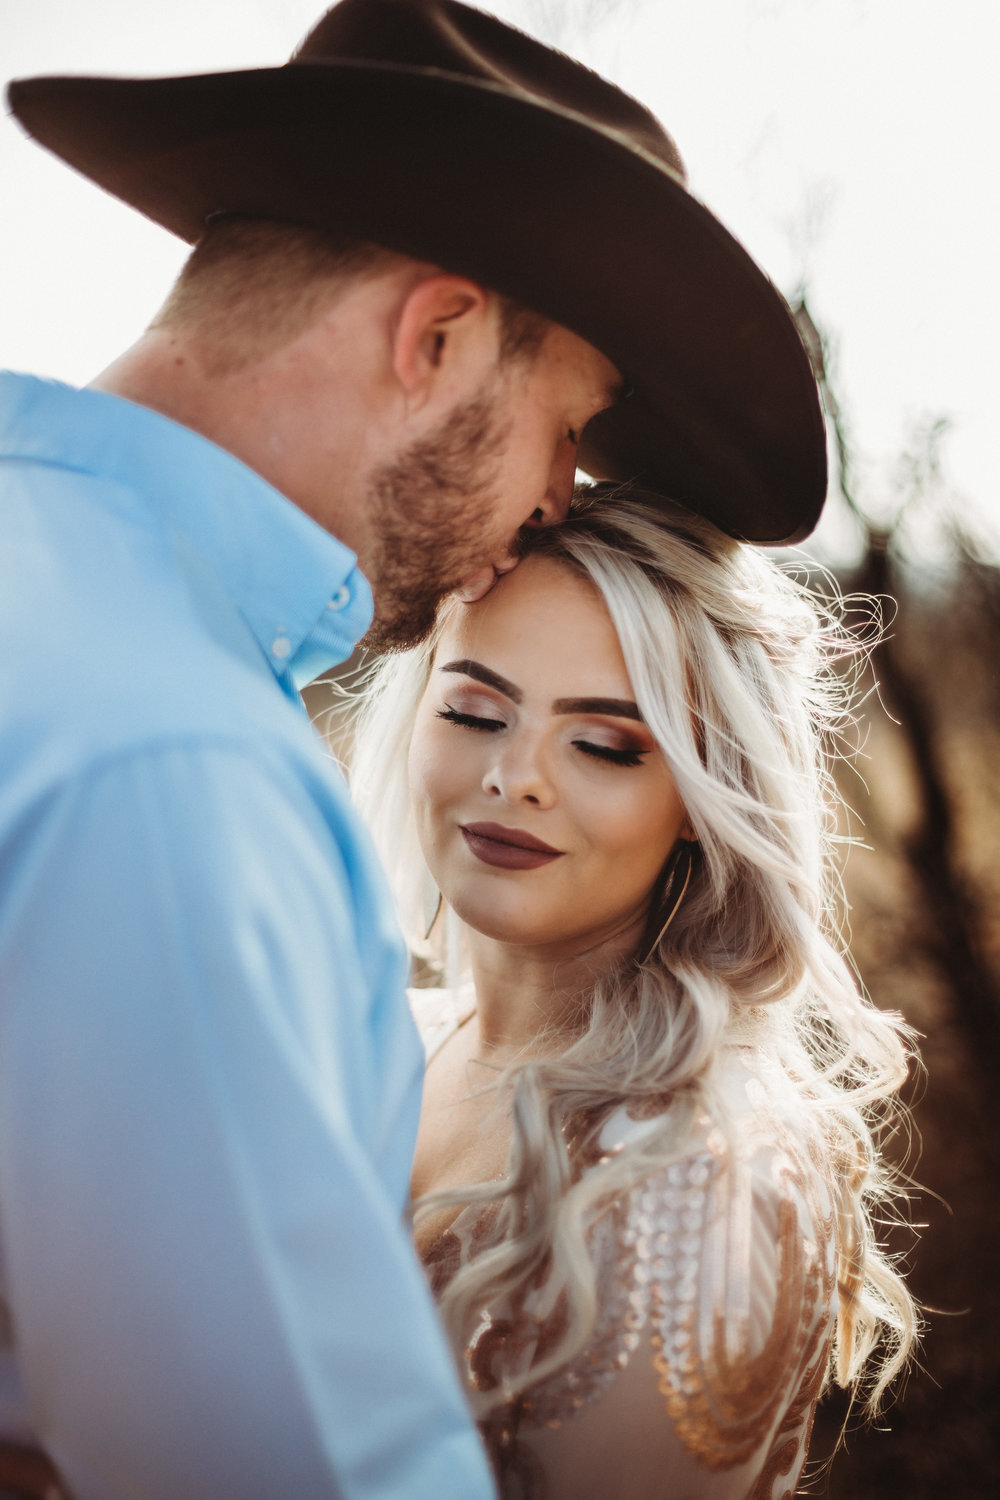  Lighting photo of sunset through her hair and focusing no a kiss on the forehead and black cowboy hat #engagementphotos #engaged #personality #amarillotexas #engagementphotographer #lifestylephotos #amarillophotographer #locationchoice #texasengagementphotos #engagment #tealawardphotography #westernstyle 